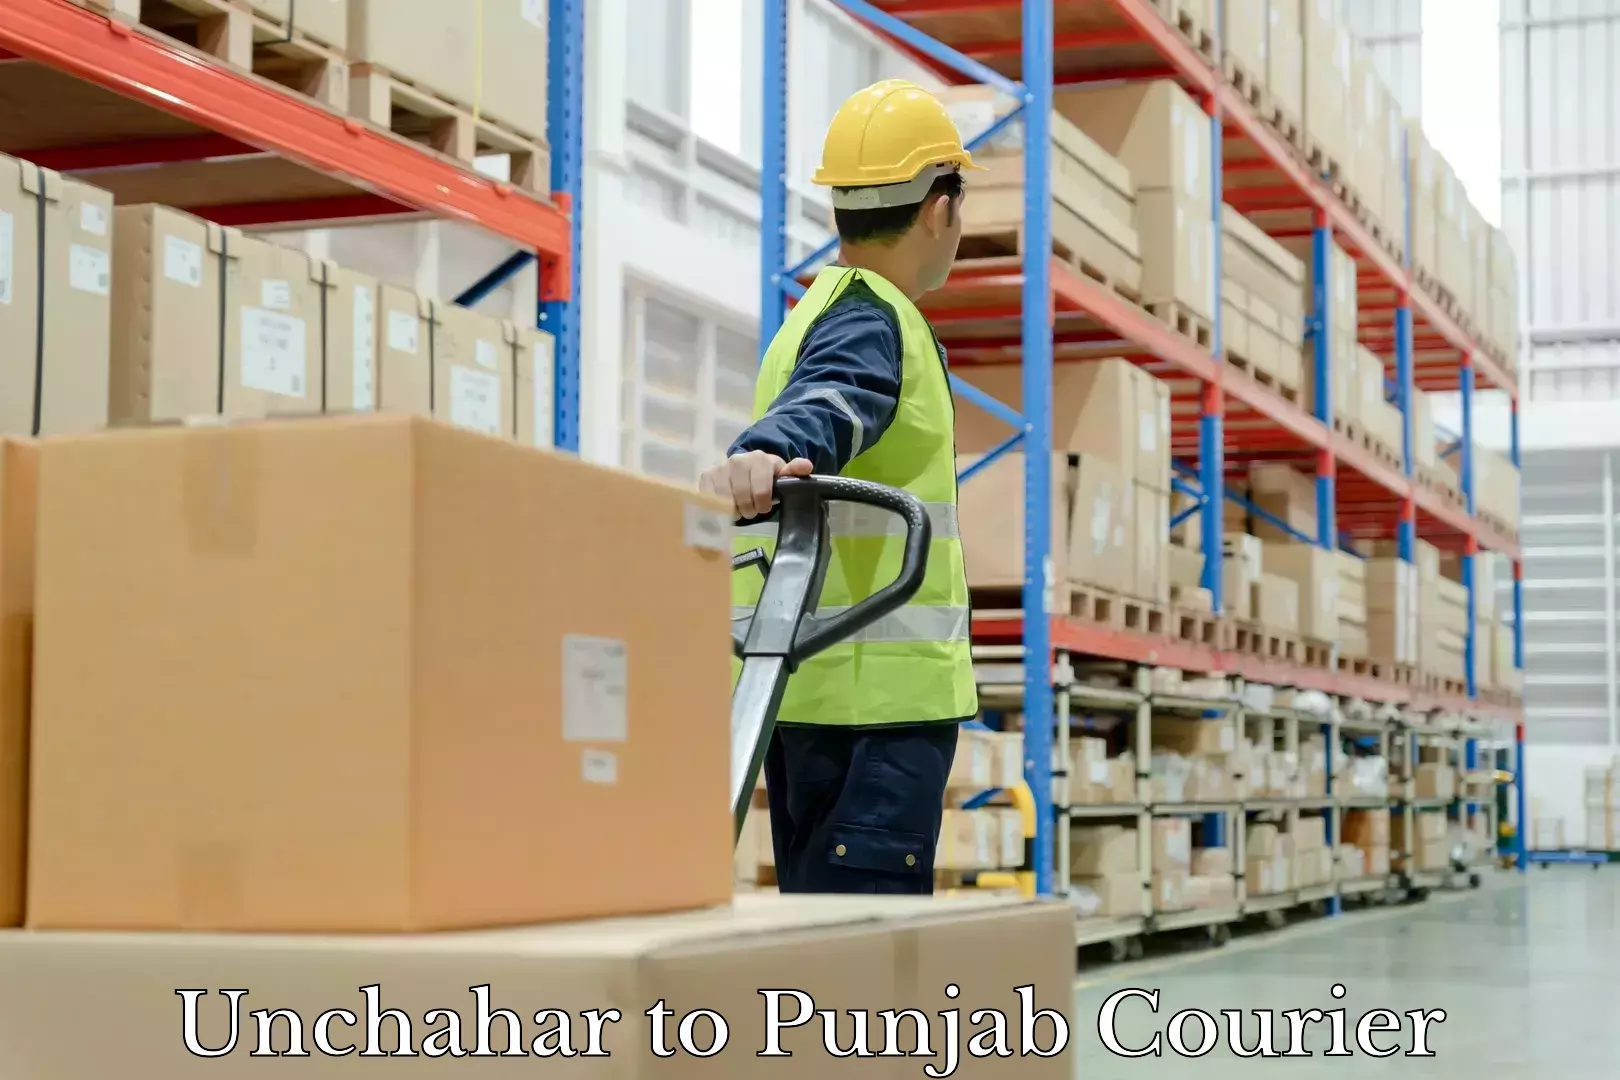 Personal effects shipping Unchahar to Punjab